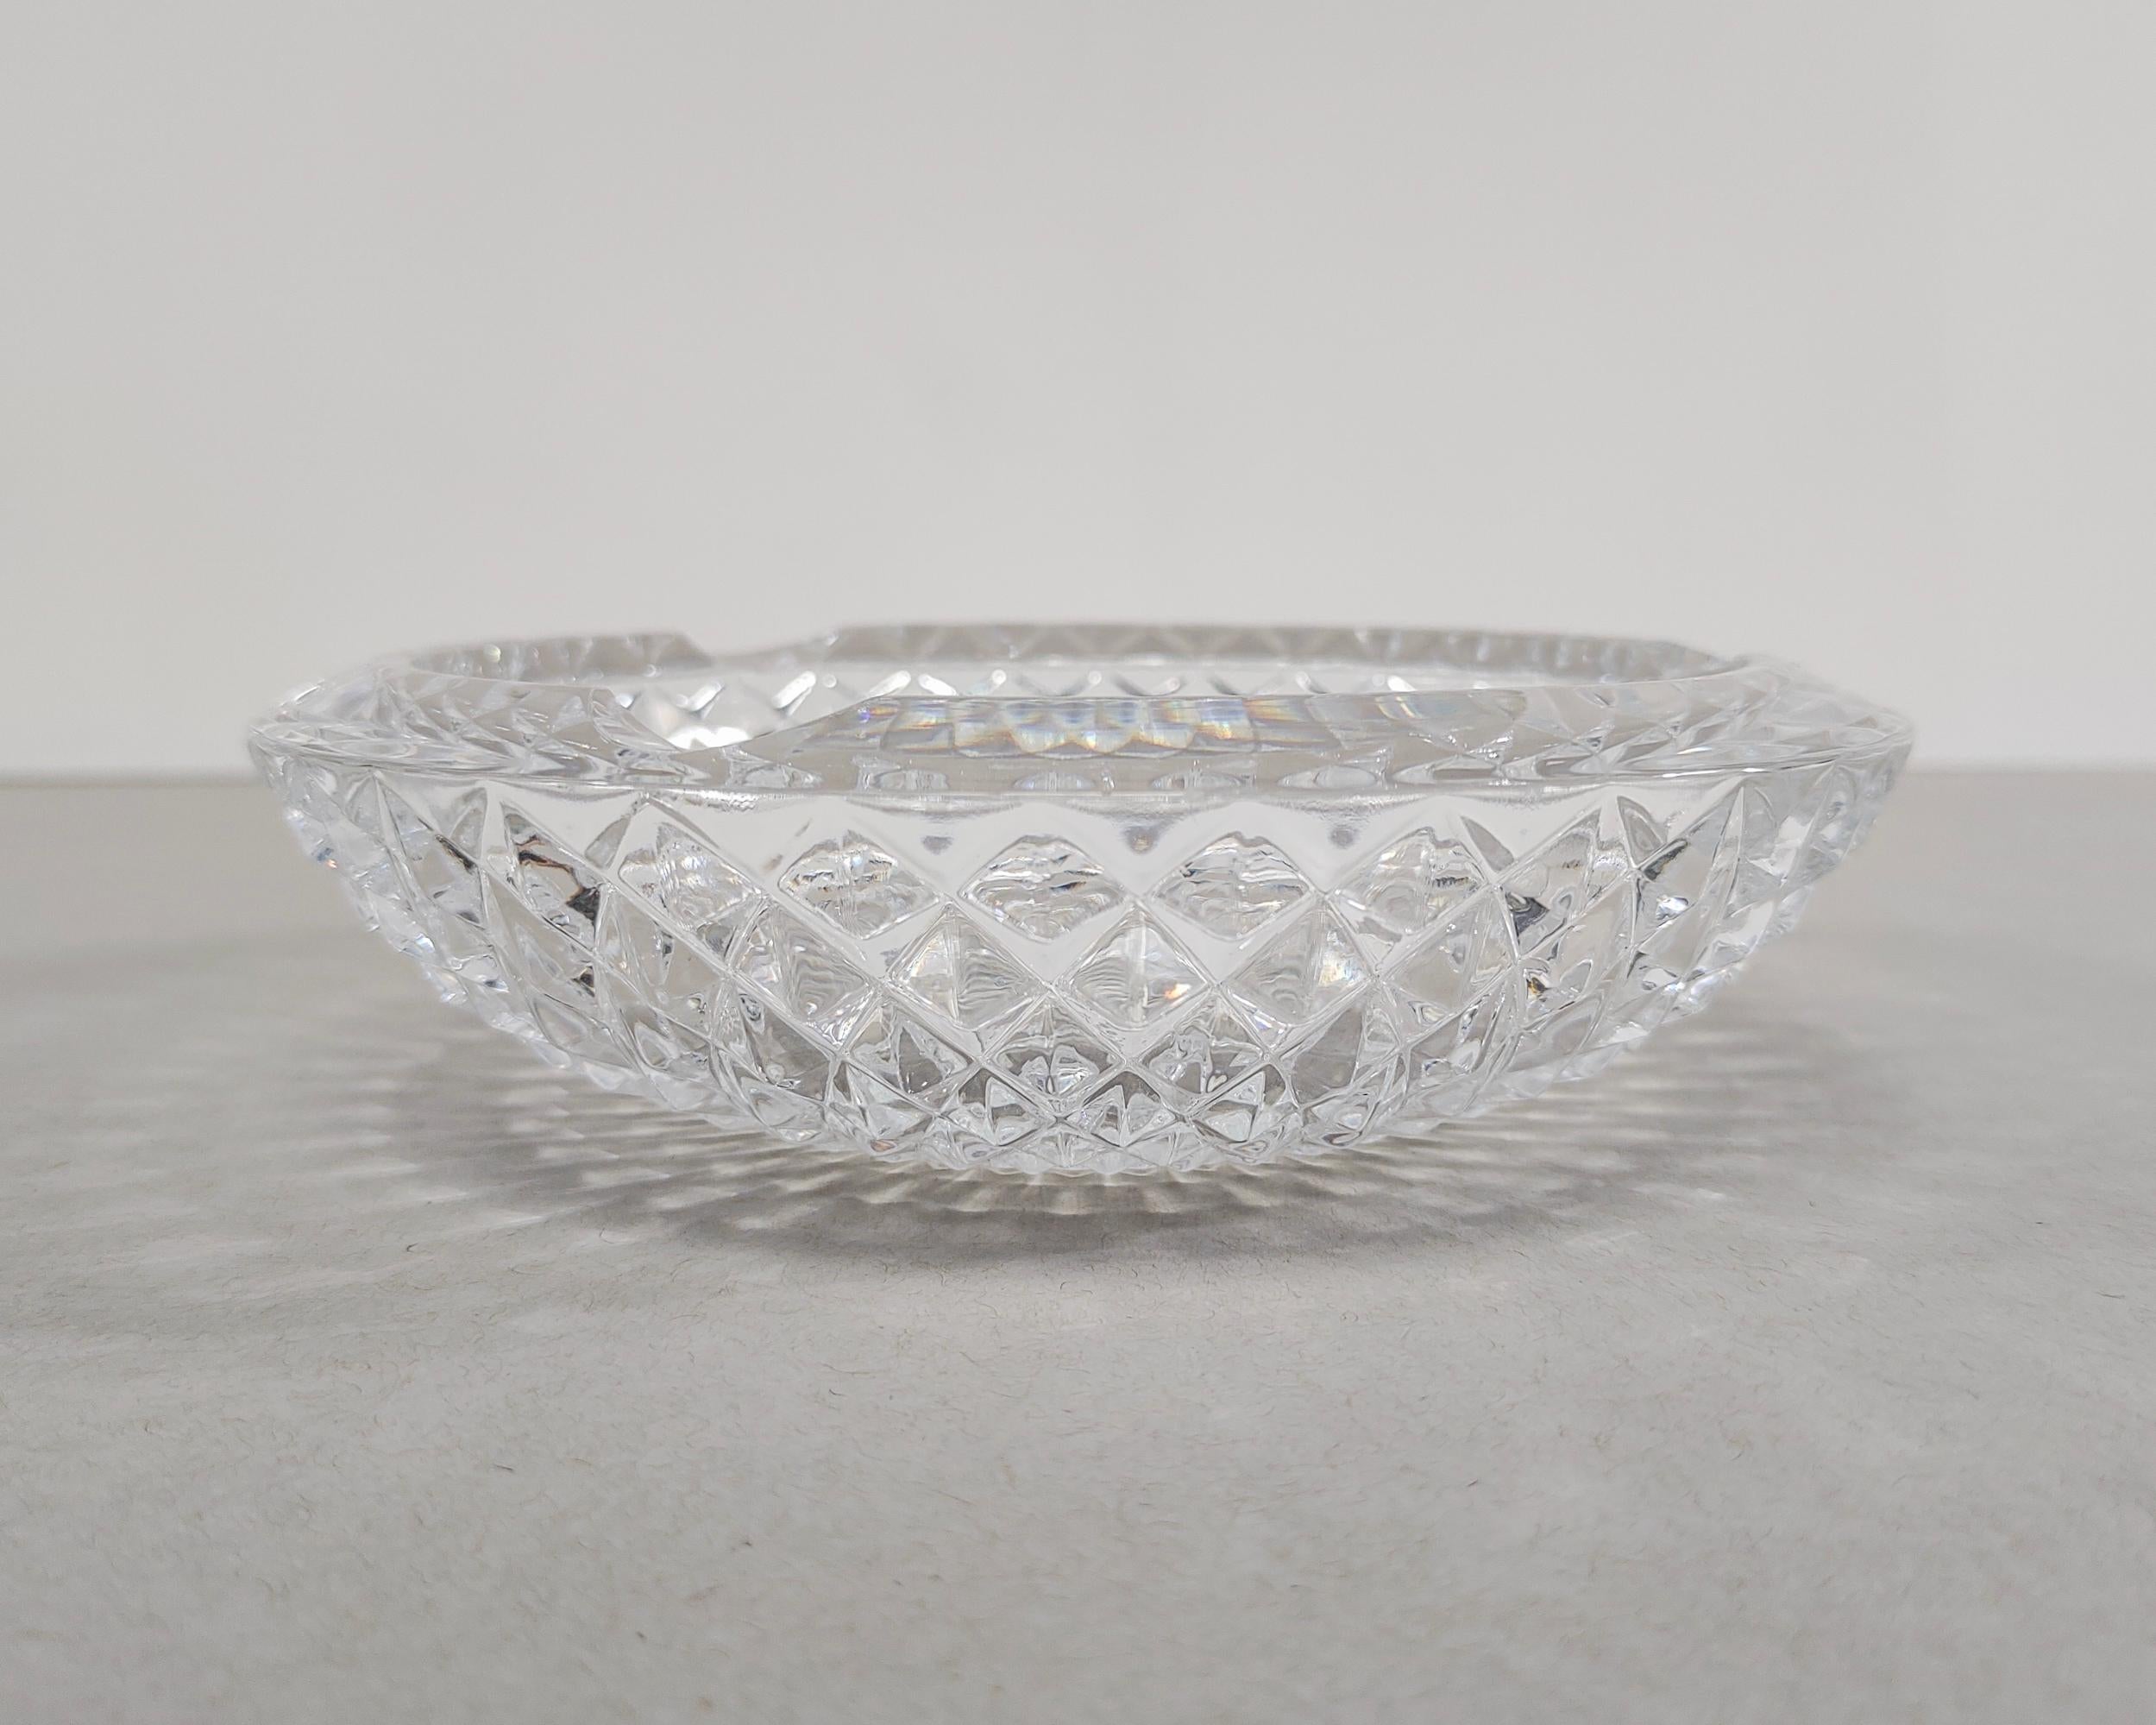 Vintage crystal ashtray circa 1960 with studded design that cascades down exterior. Three cigar-size notches around the rim. Overall great condition, a few tiny chips unnoticeable to the eye that can only be detected by touch.

6.5